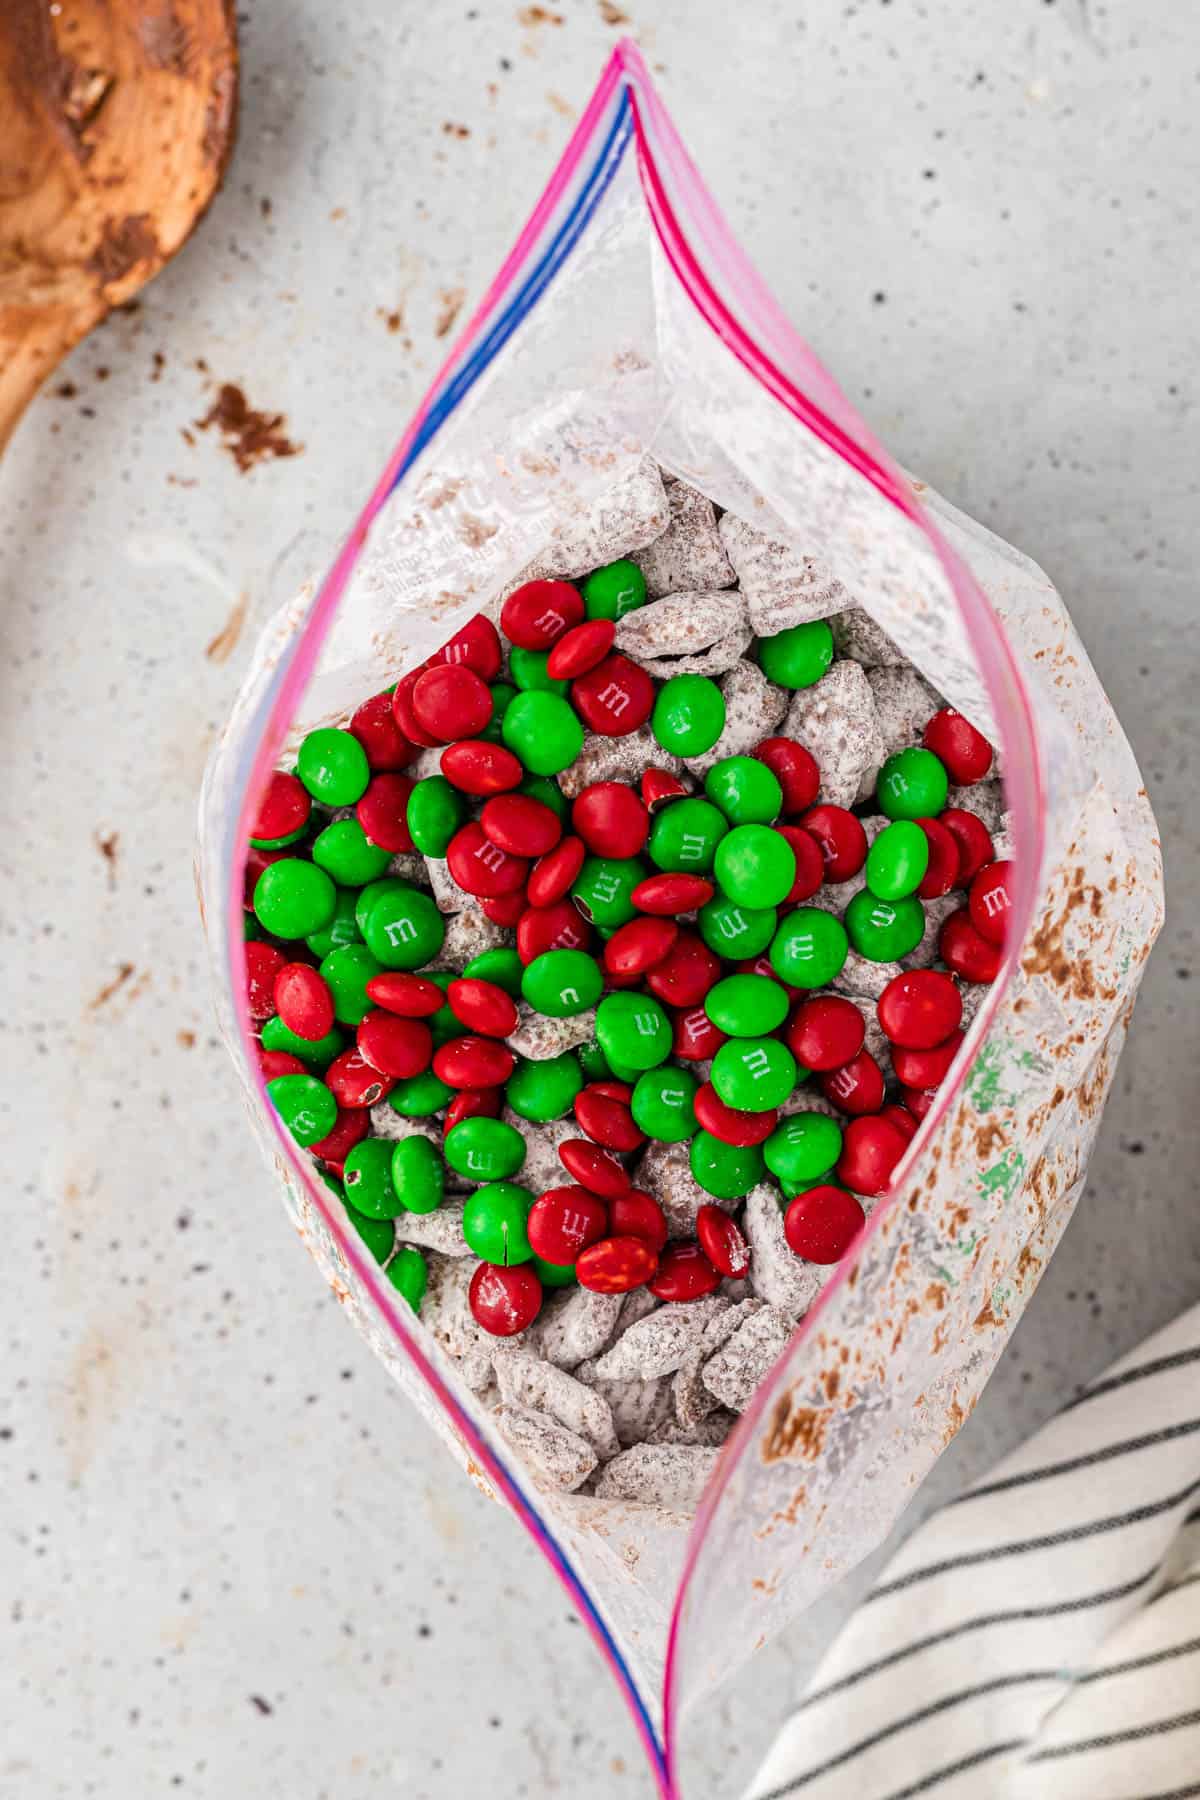 Adding holiday mix-ins to puppy chow.